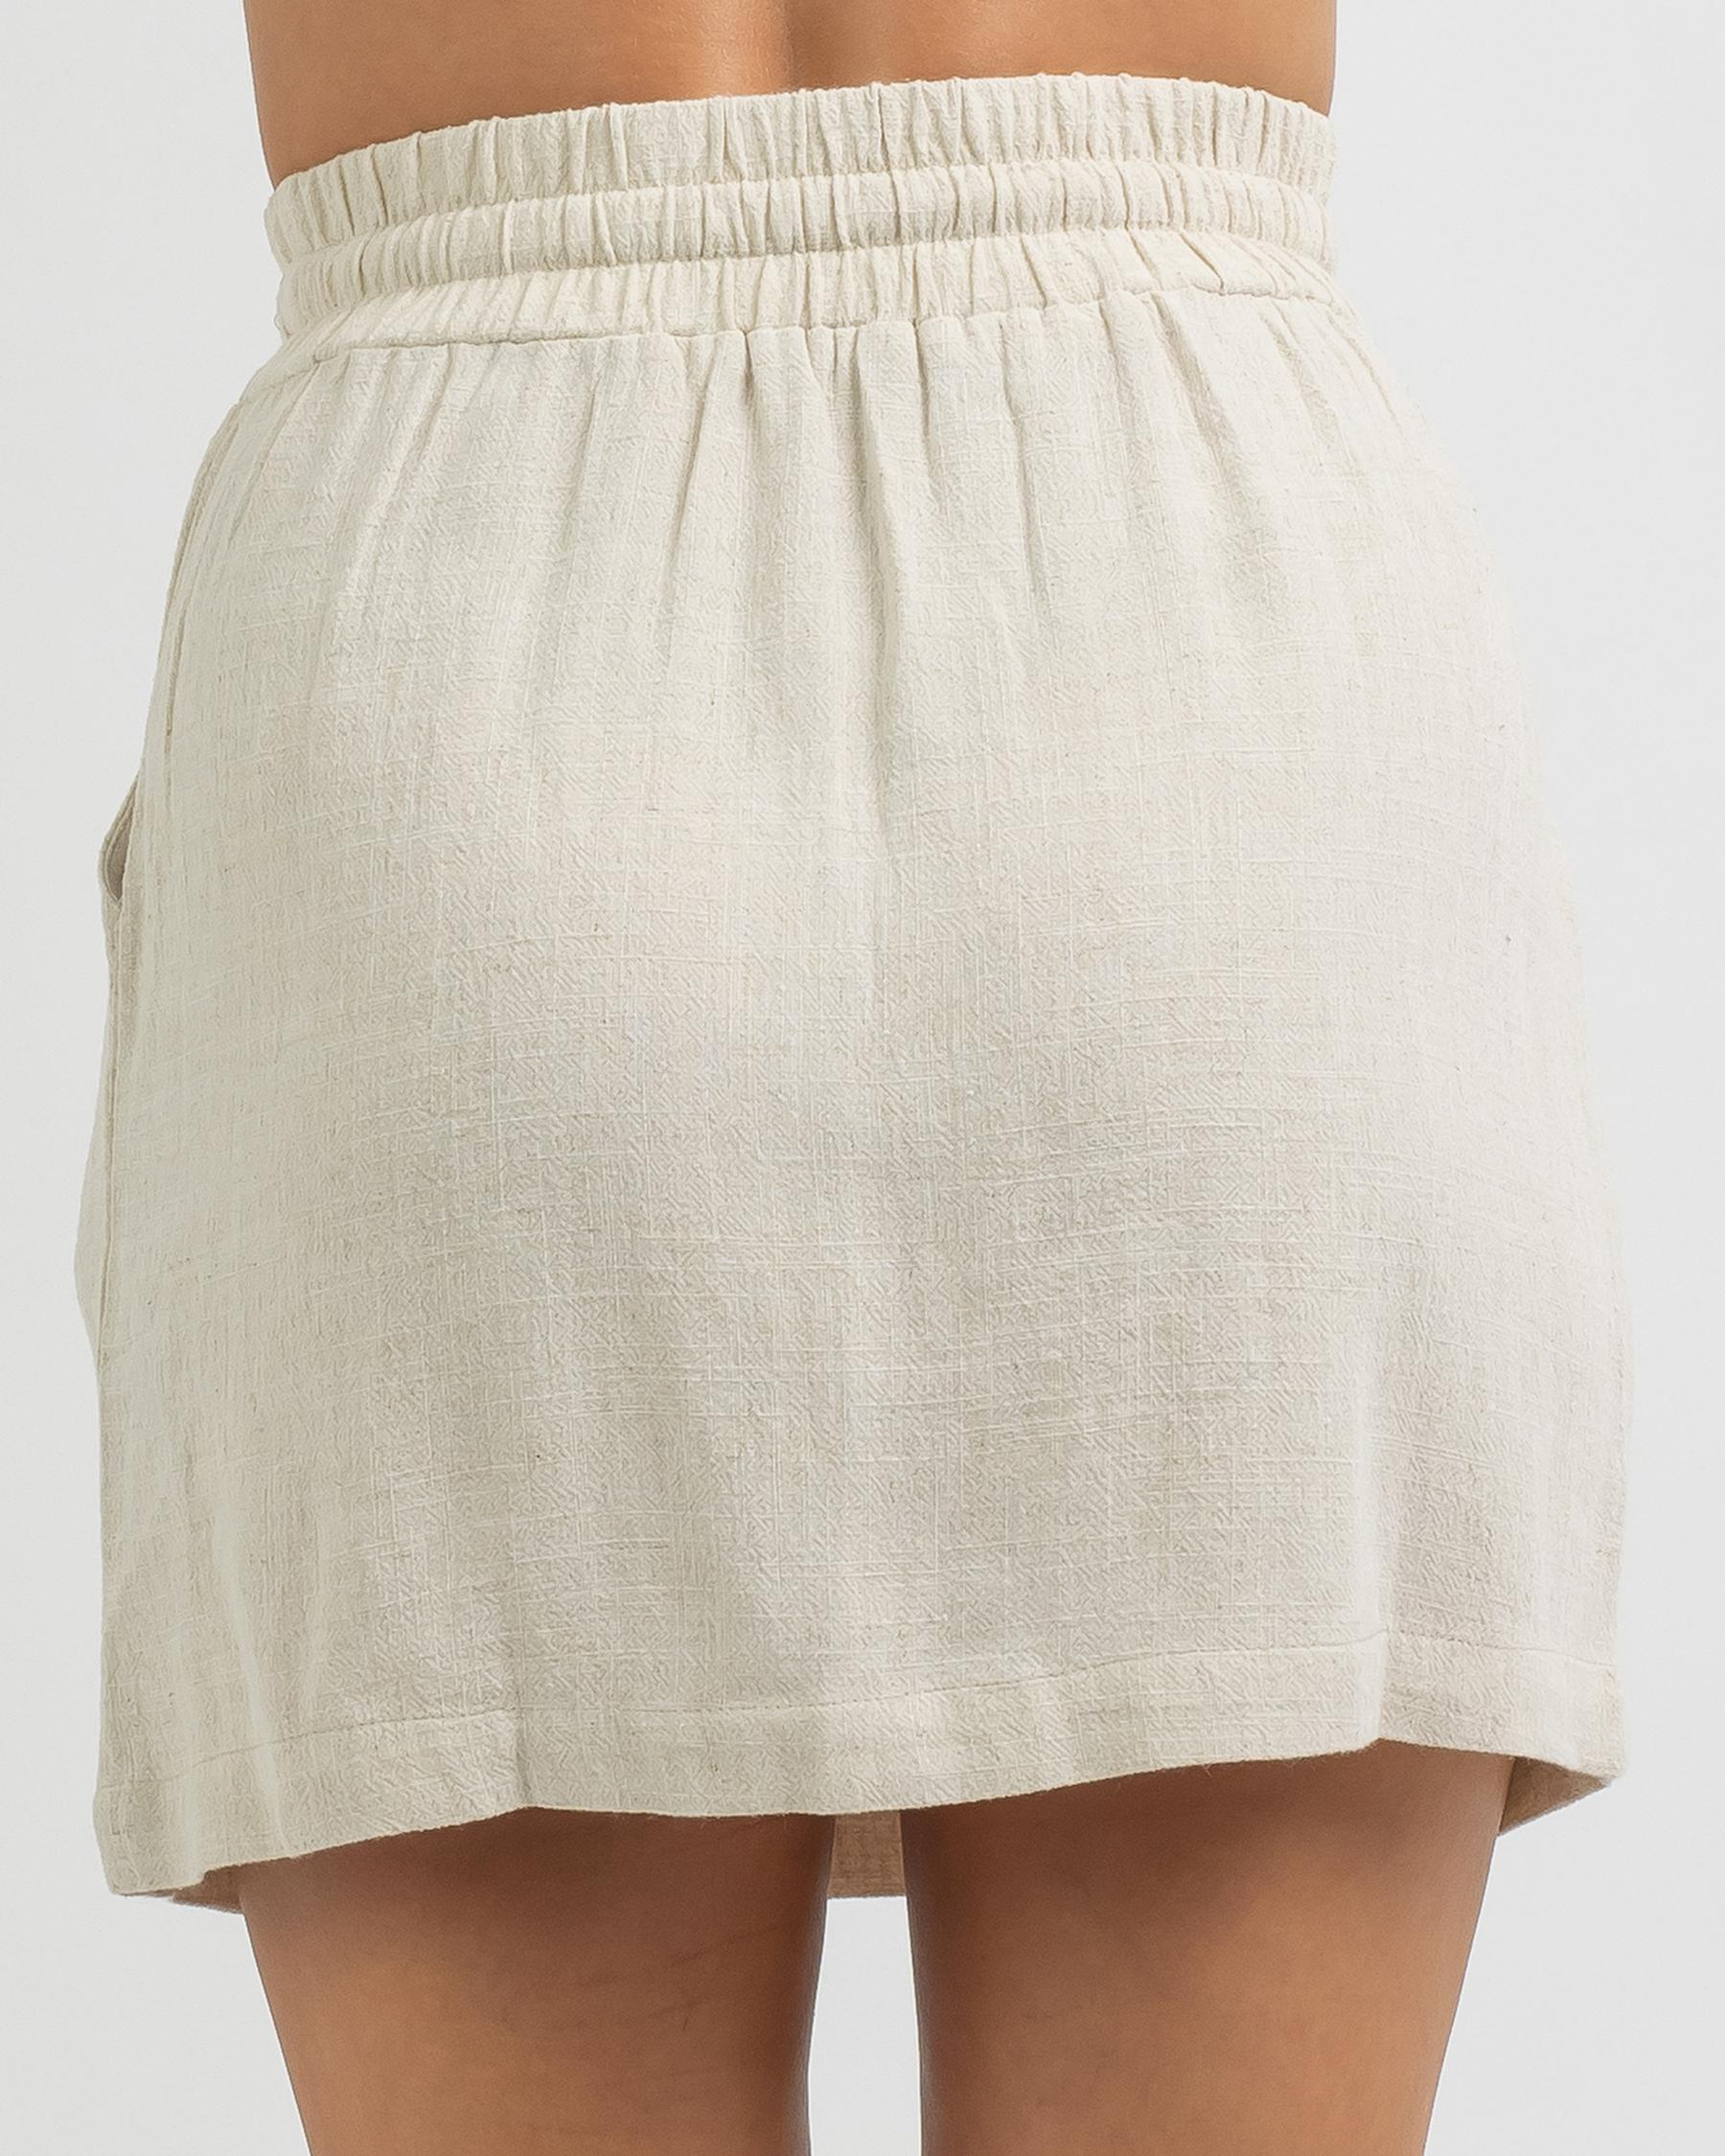 Yours Truly Genie Skirt In Beige - Fast Shipping & Easy Returns - City ...